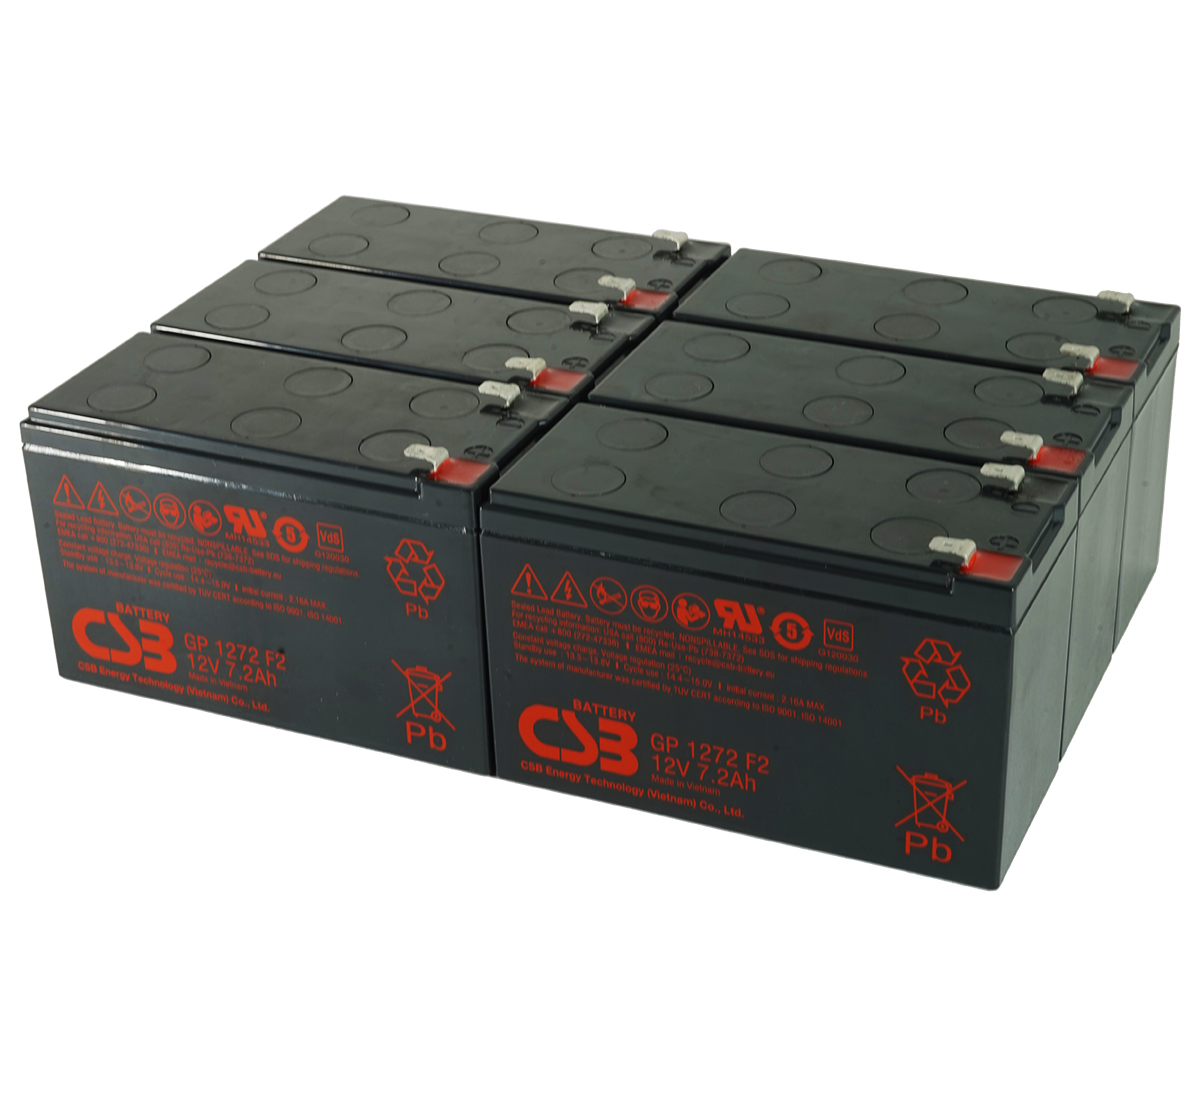 MDS1016 UPS Battery Kit for MGE AB1016